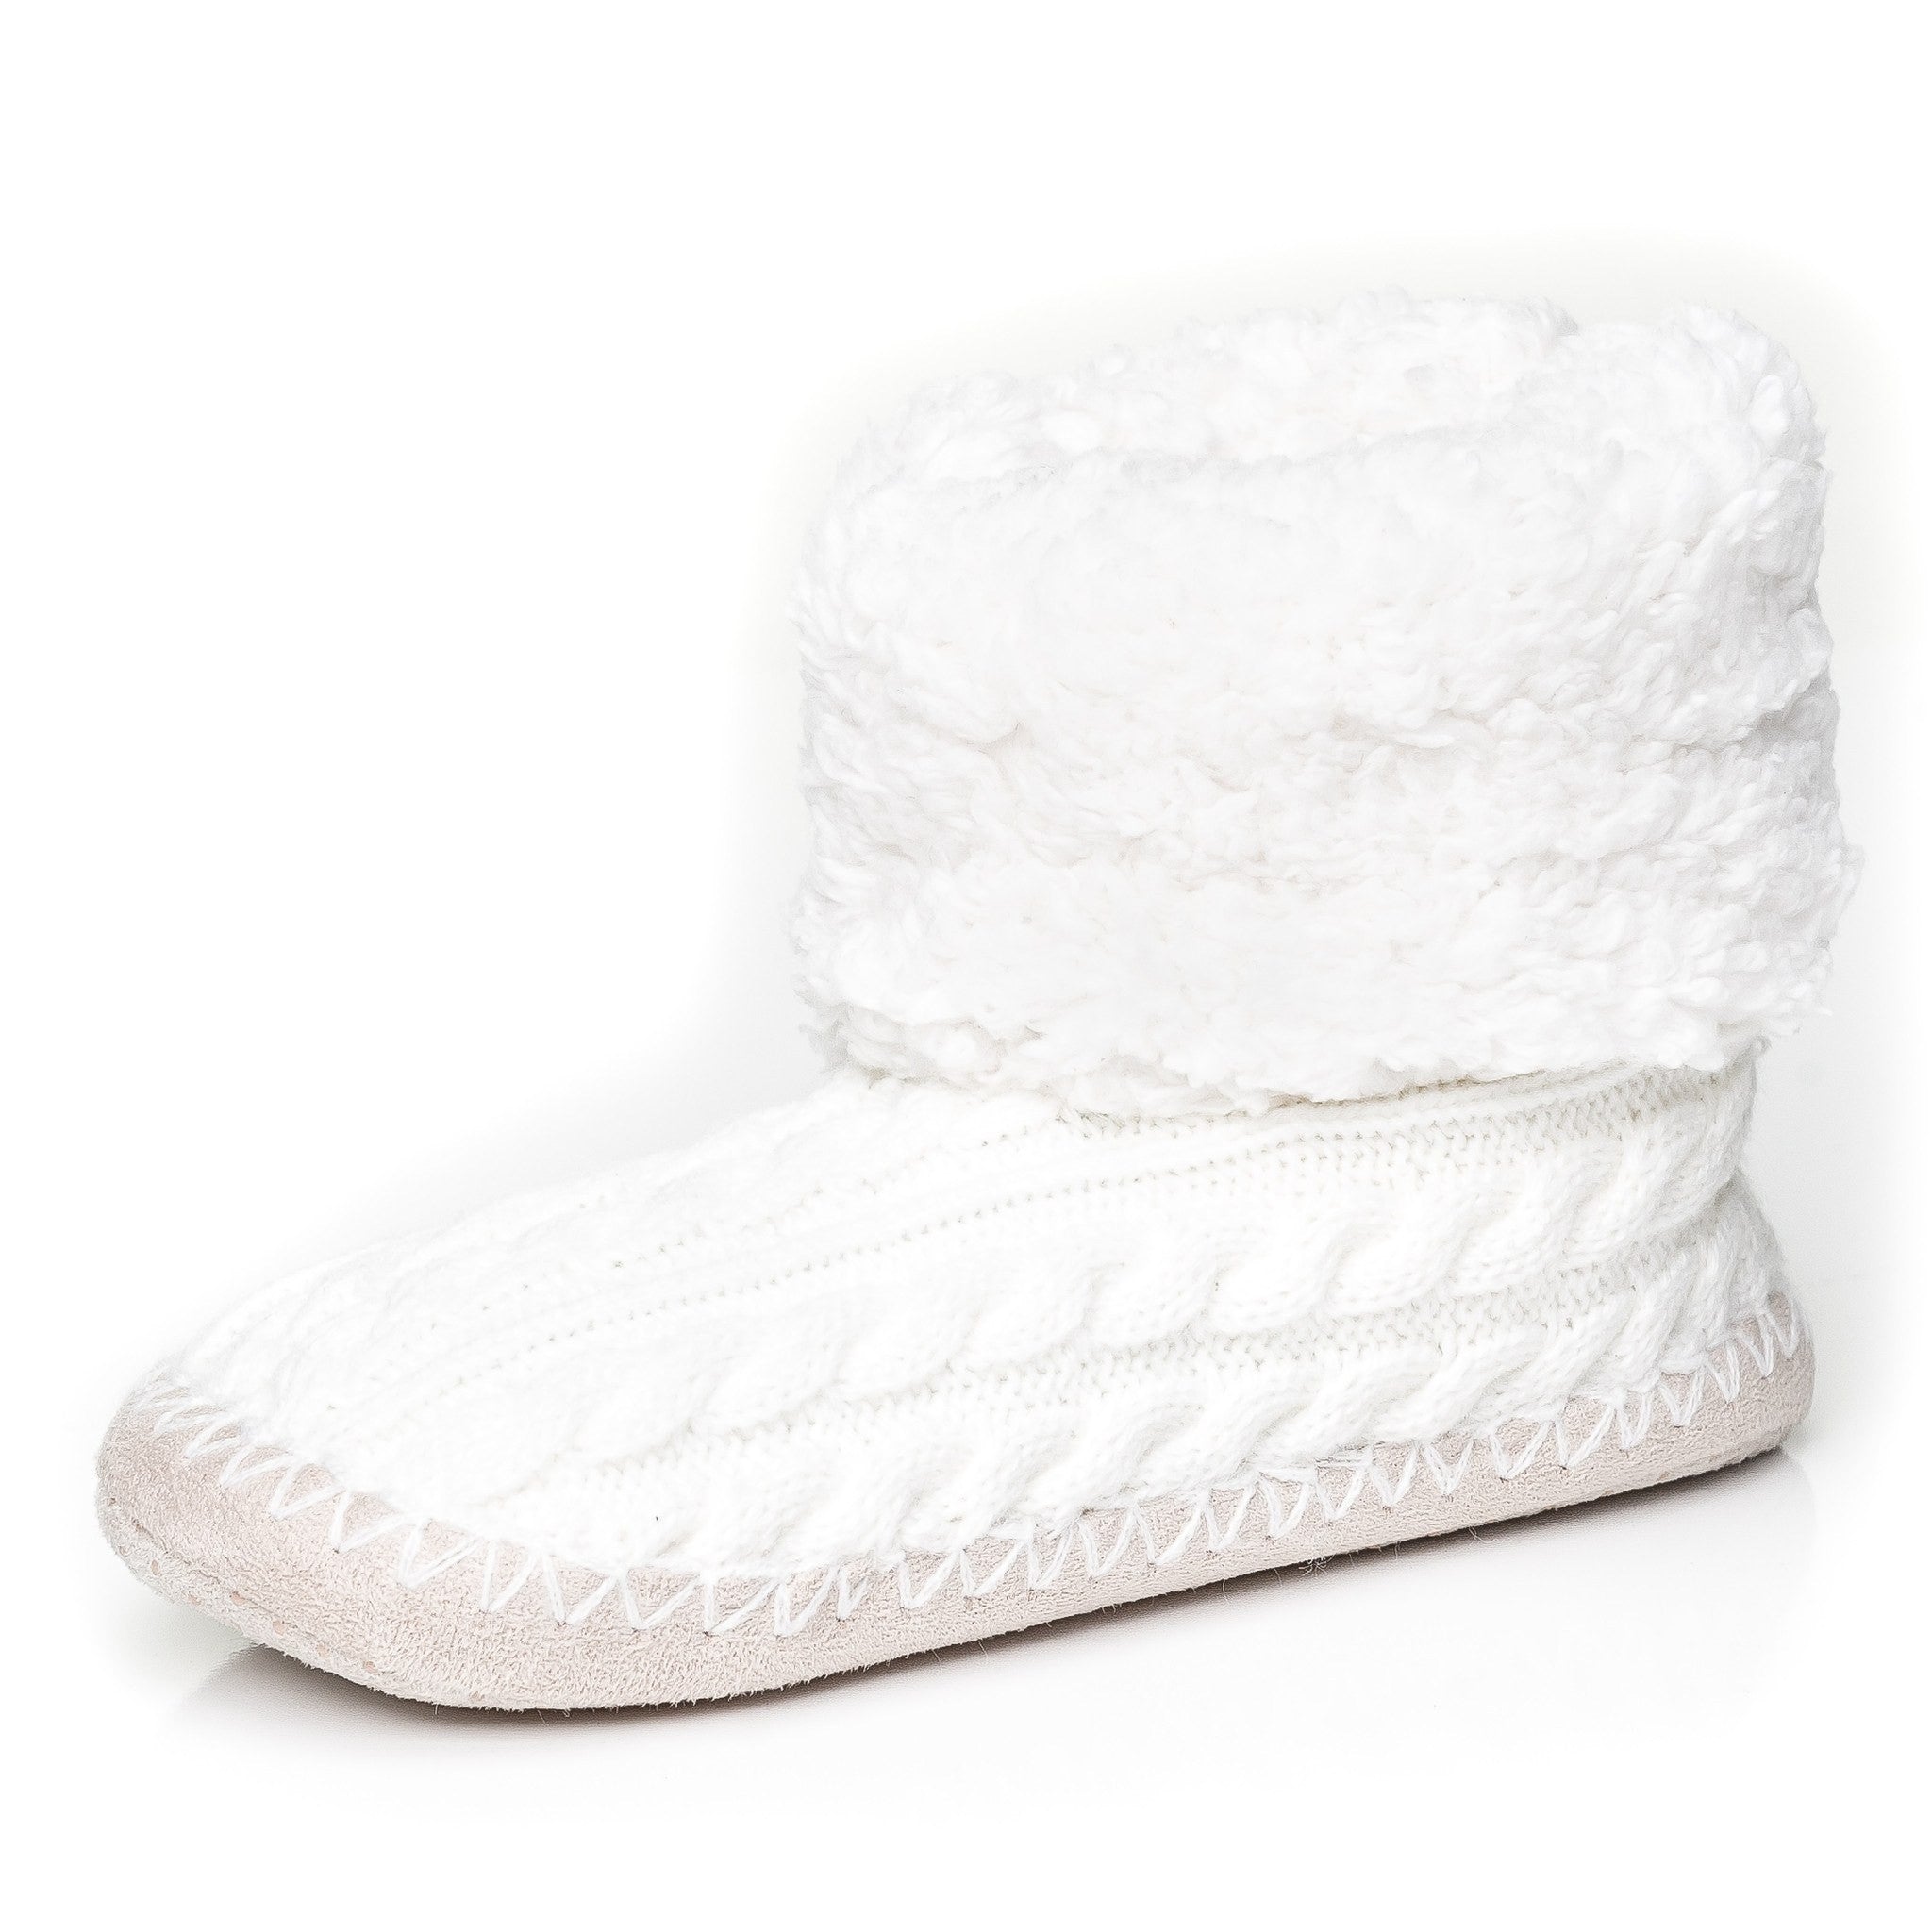 Women's Fuzzy Delight Cable Knit Indoor Short Boot Slippers